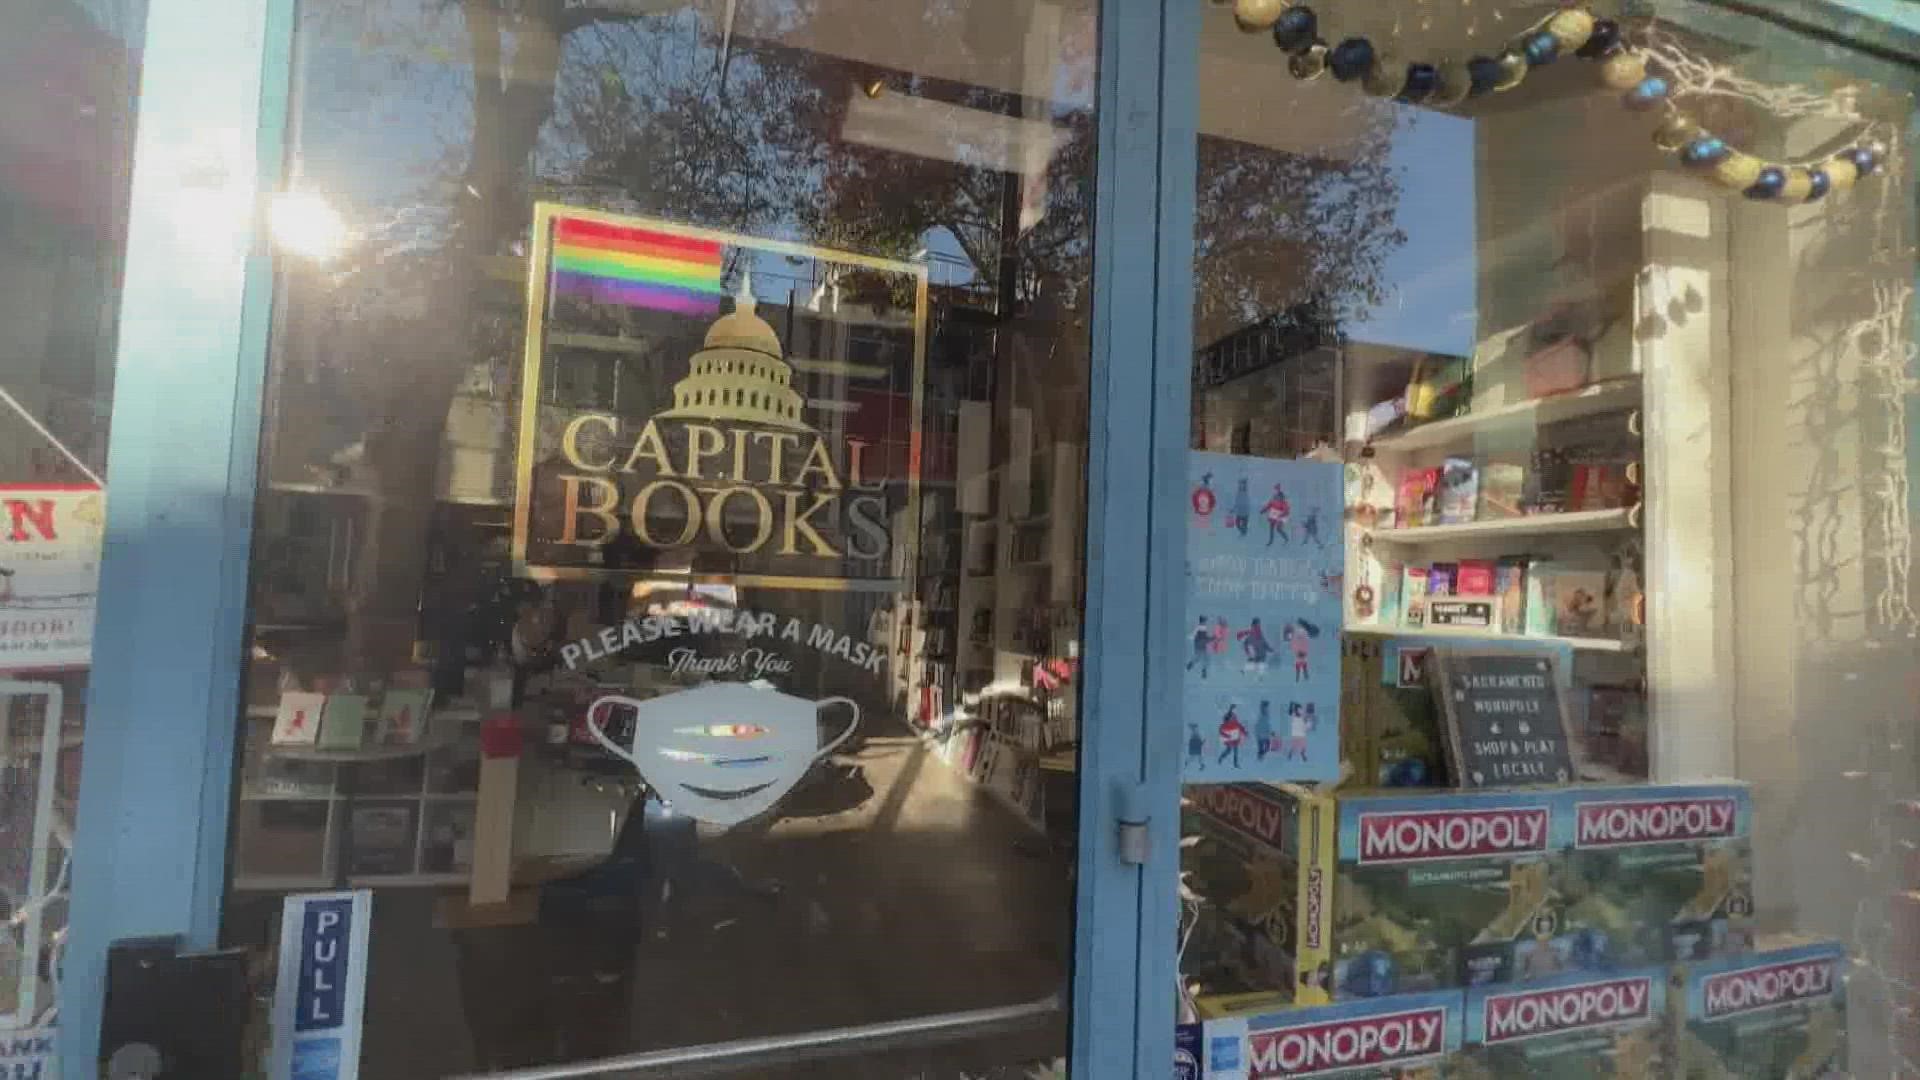 Capital Books in Sacramento gives away free books to anyone in need.